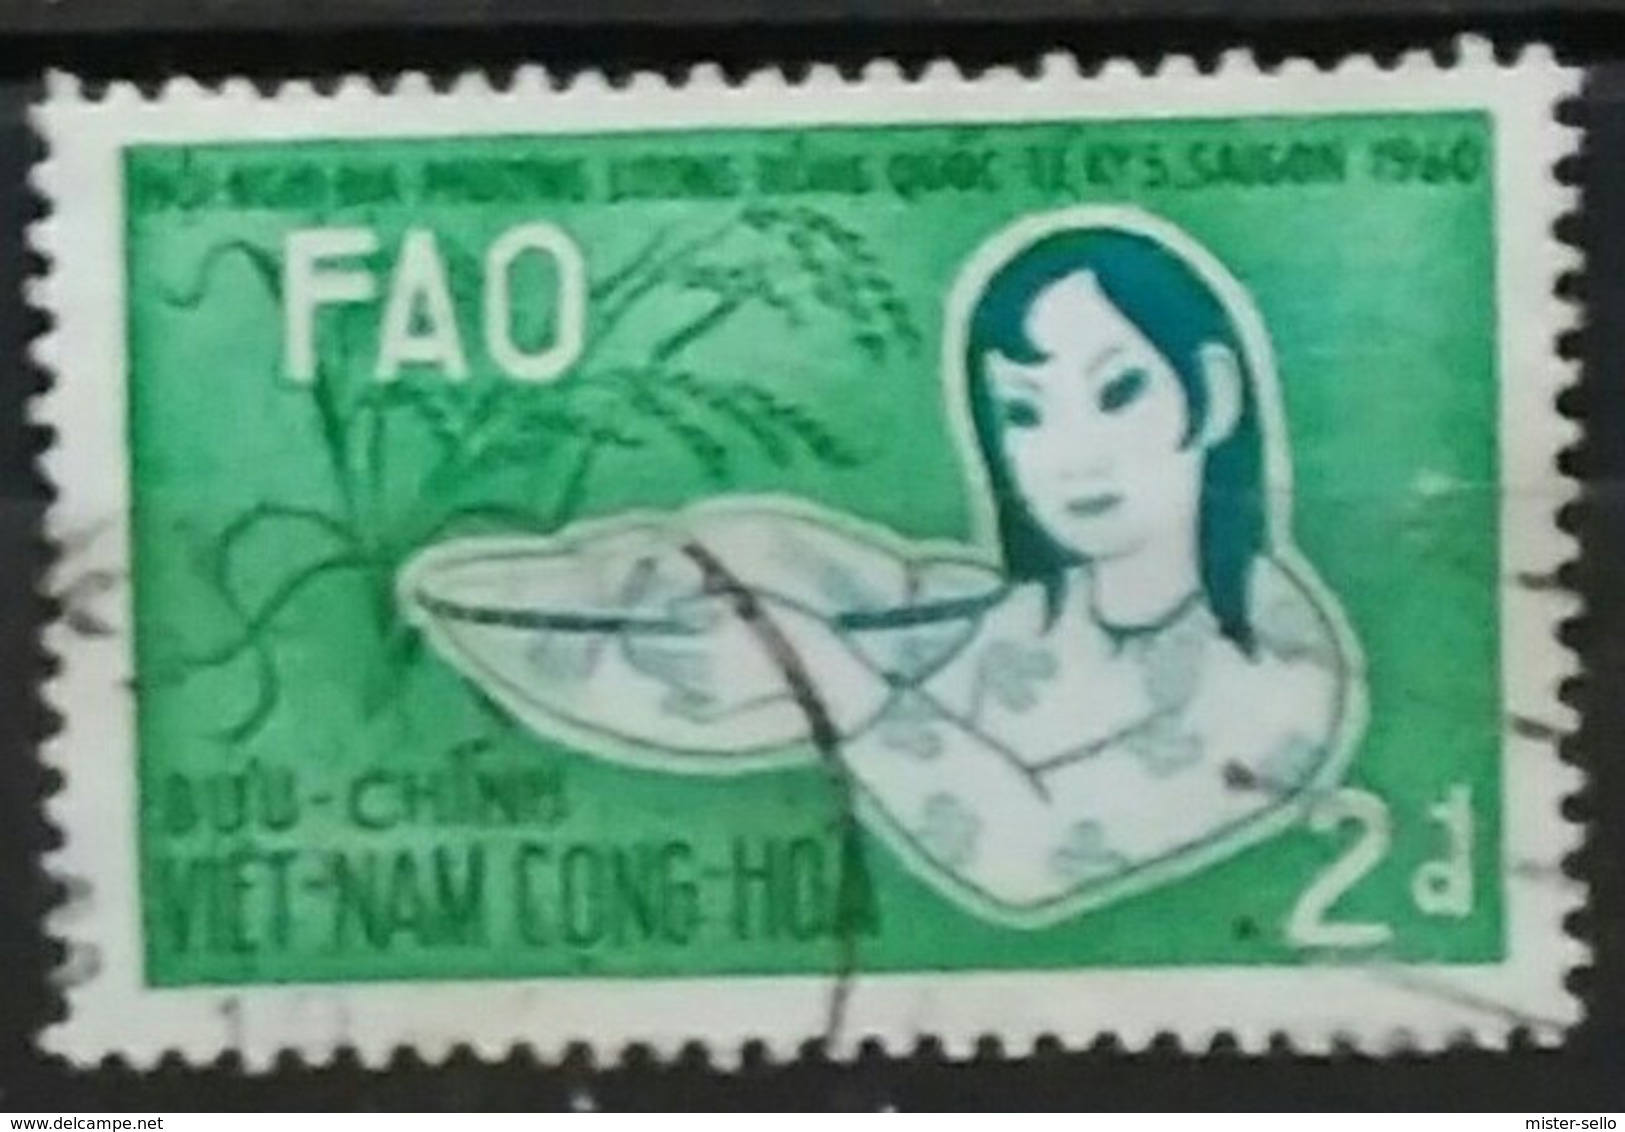 VIETNAM DEL SUR 1960 The 5th International Conference Of The Food And Agriculture Organization Or FAO. USADO - USED. - Vietnam